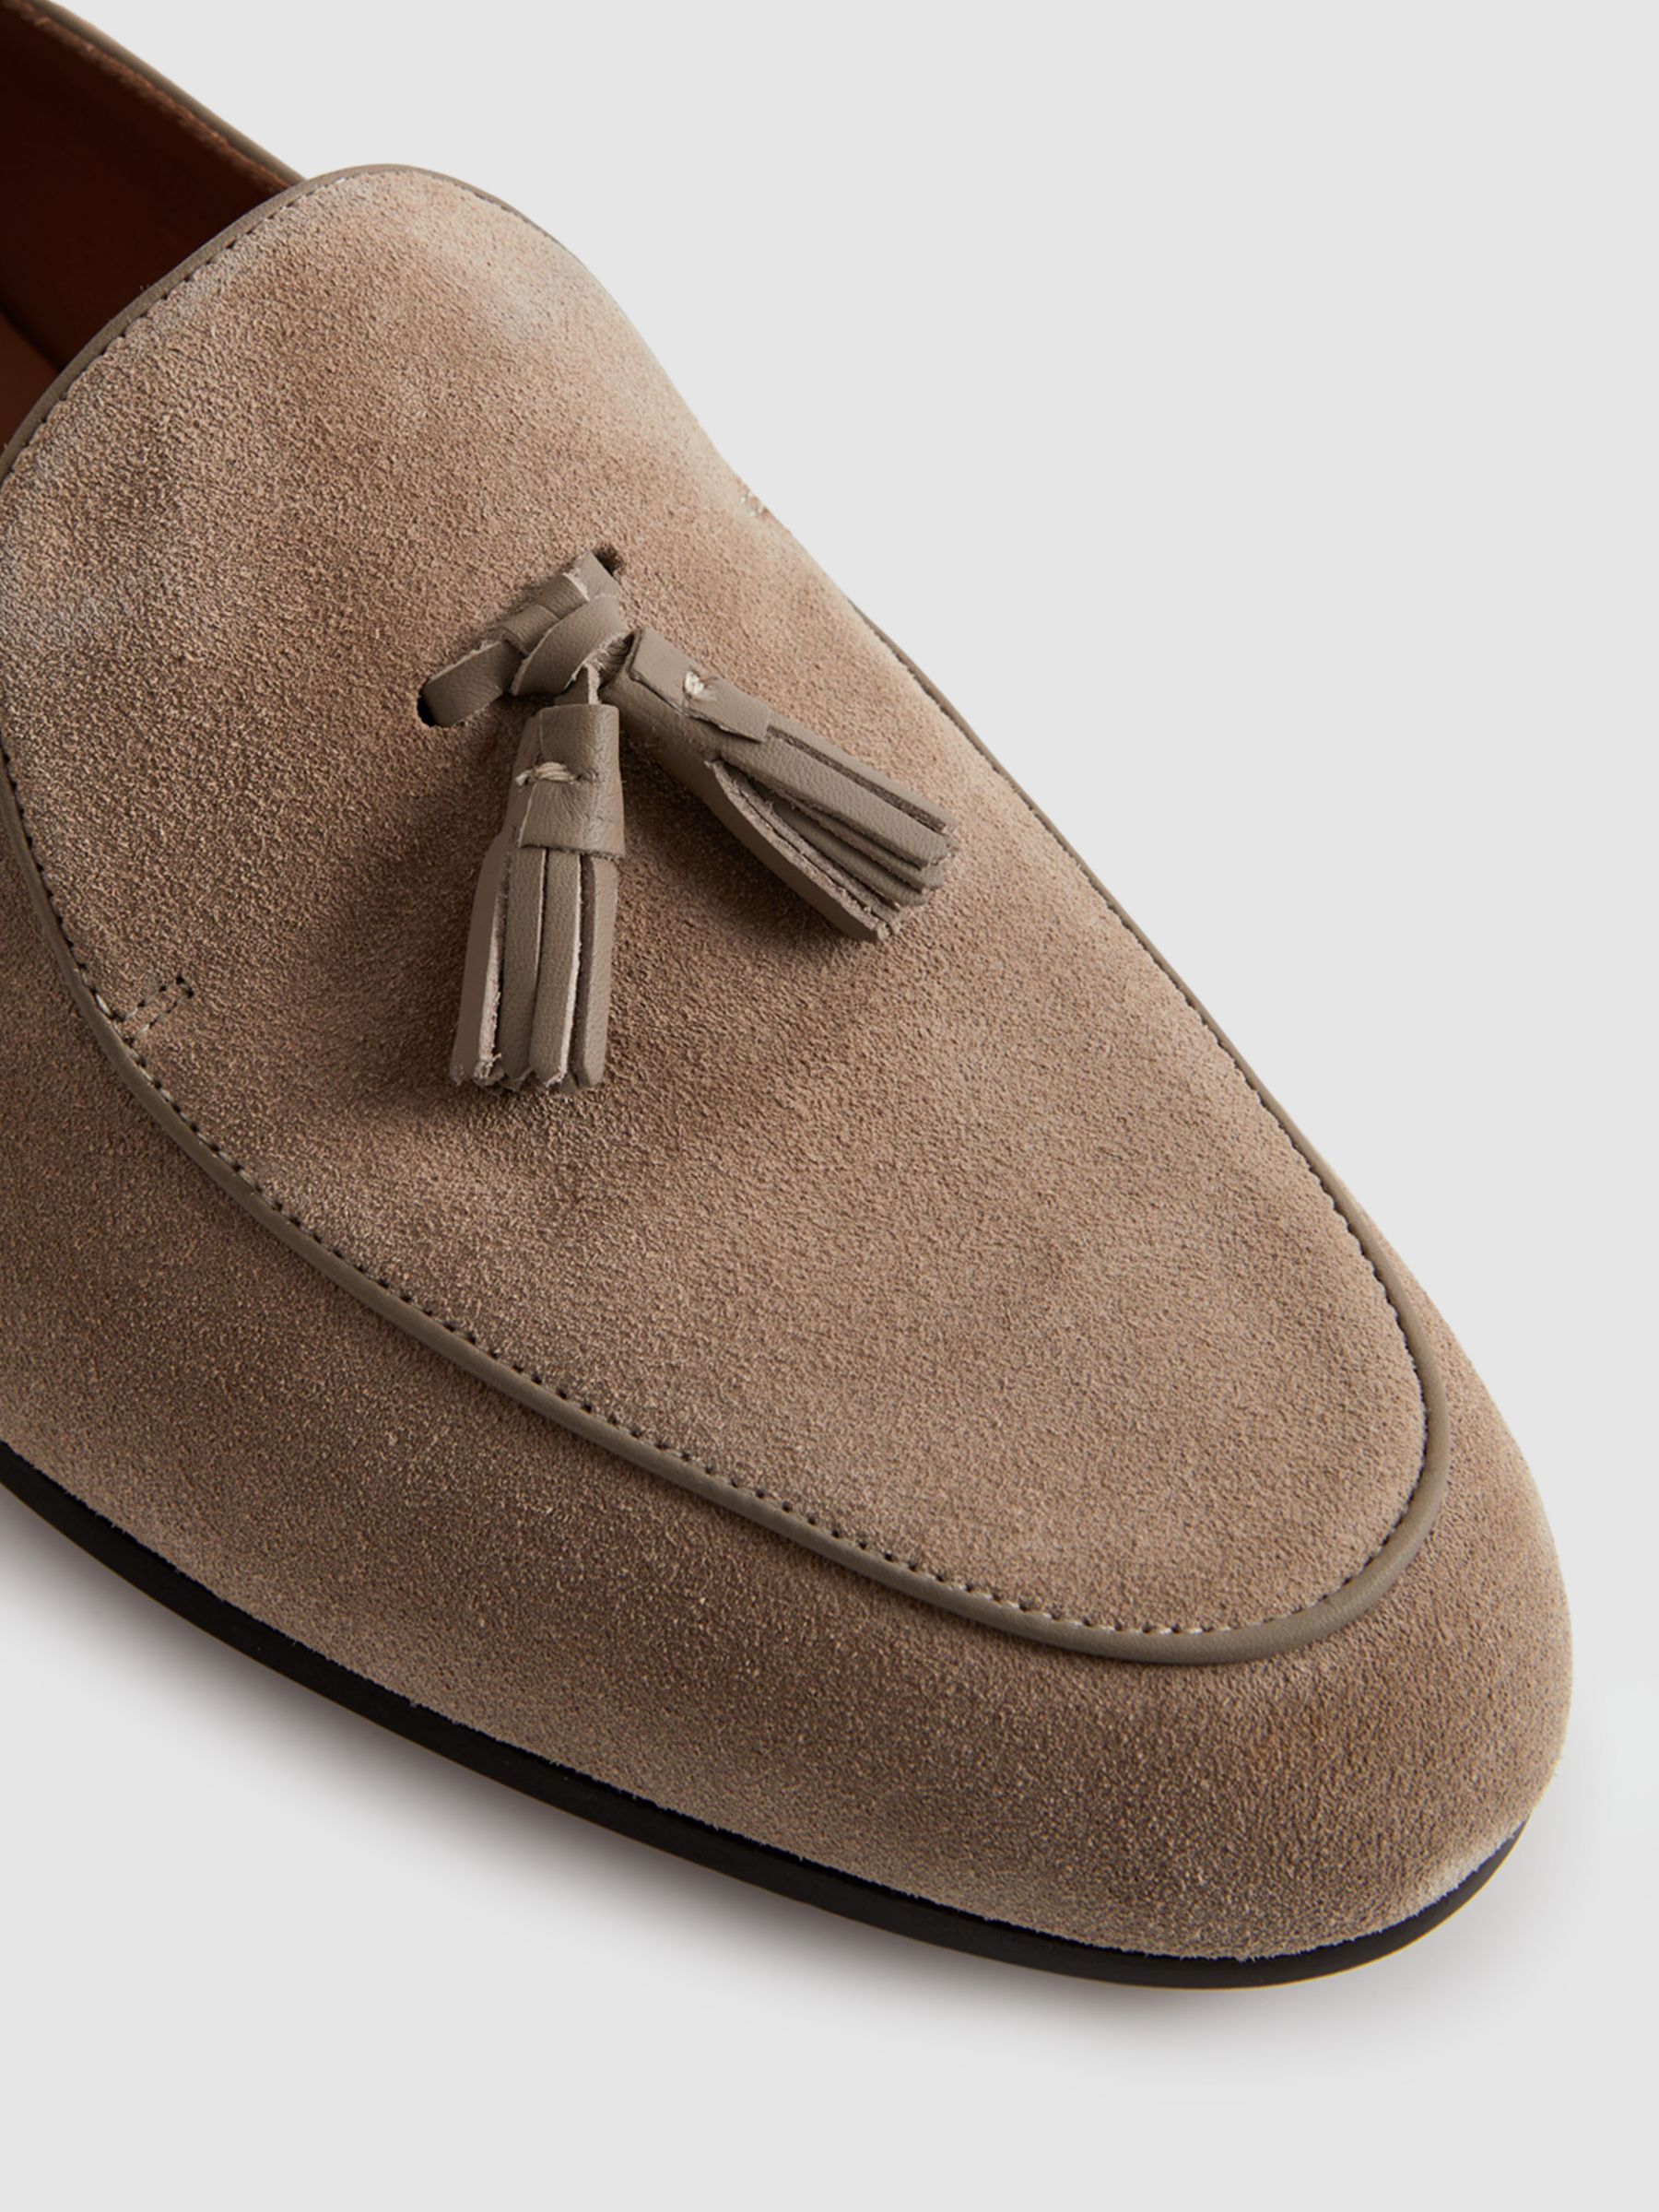 Reiss Harry Leather Tassel Loafers, Taupe, 7